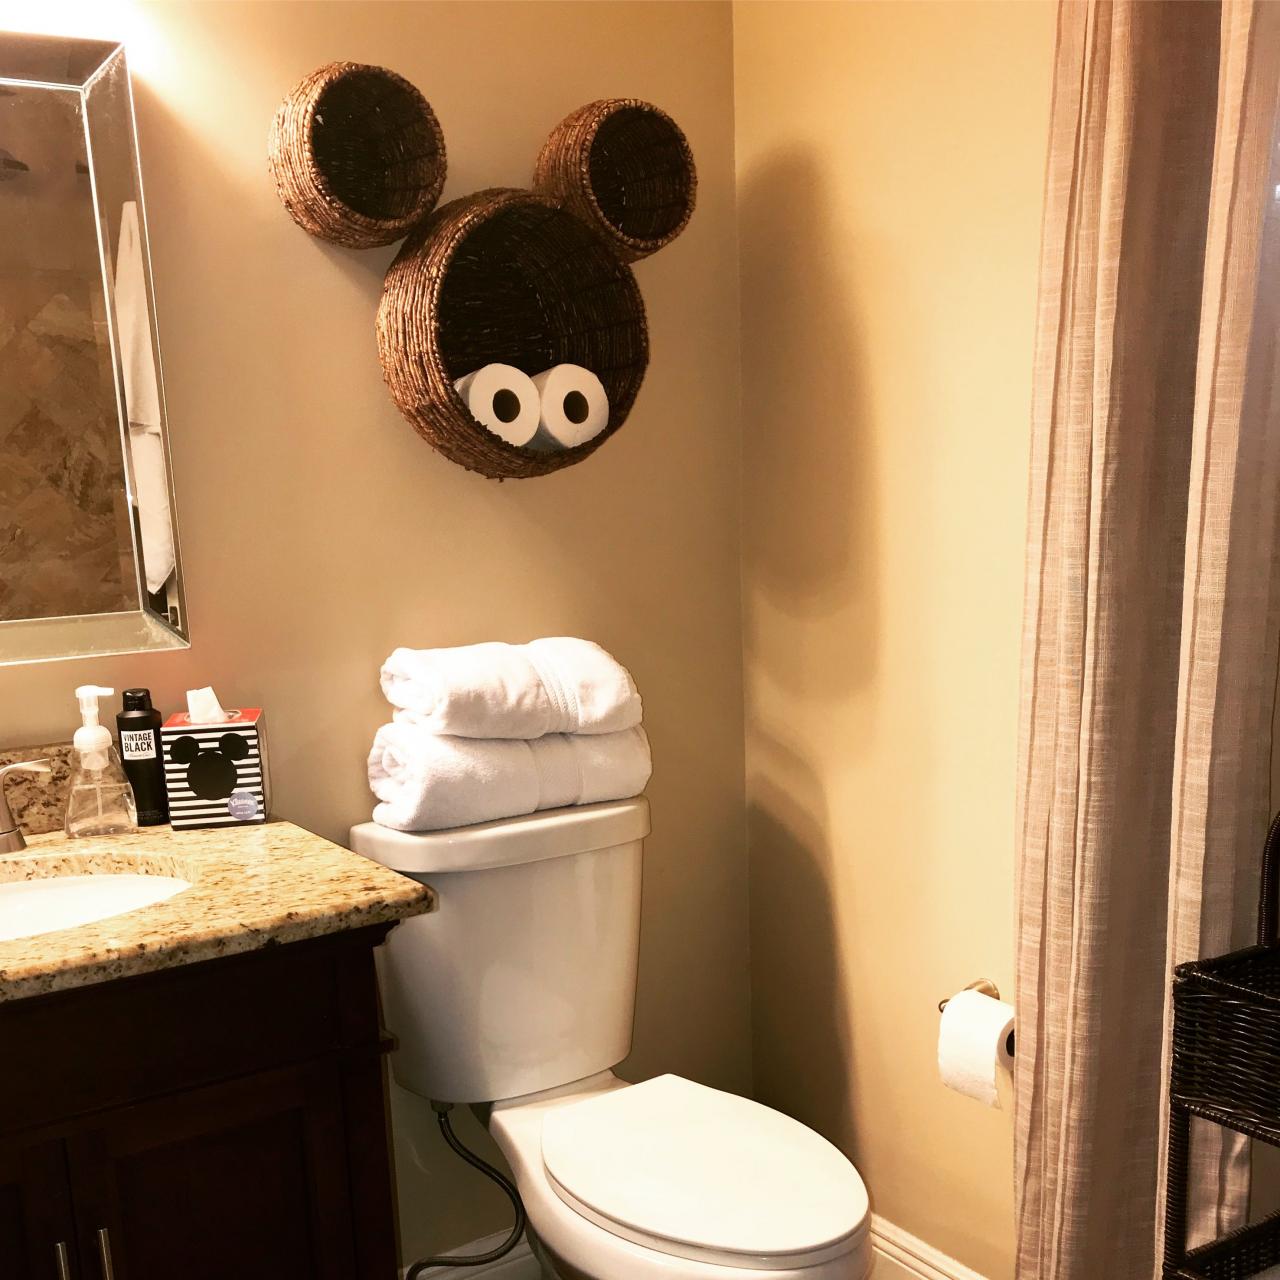 a bathroom with a toilet, sink and mickey mouse head on the wall above it